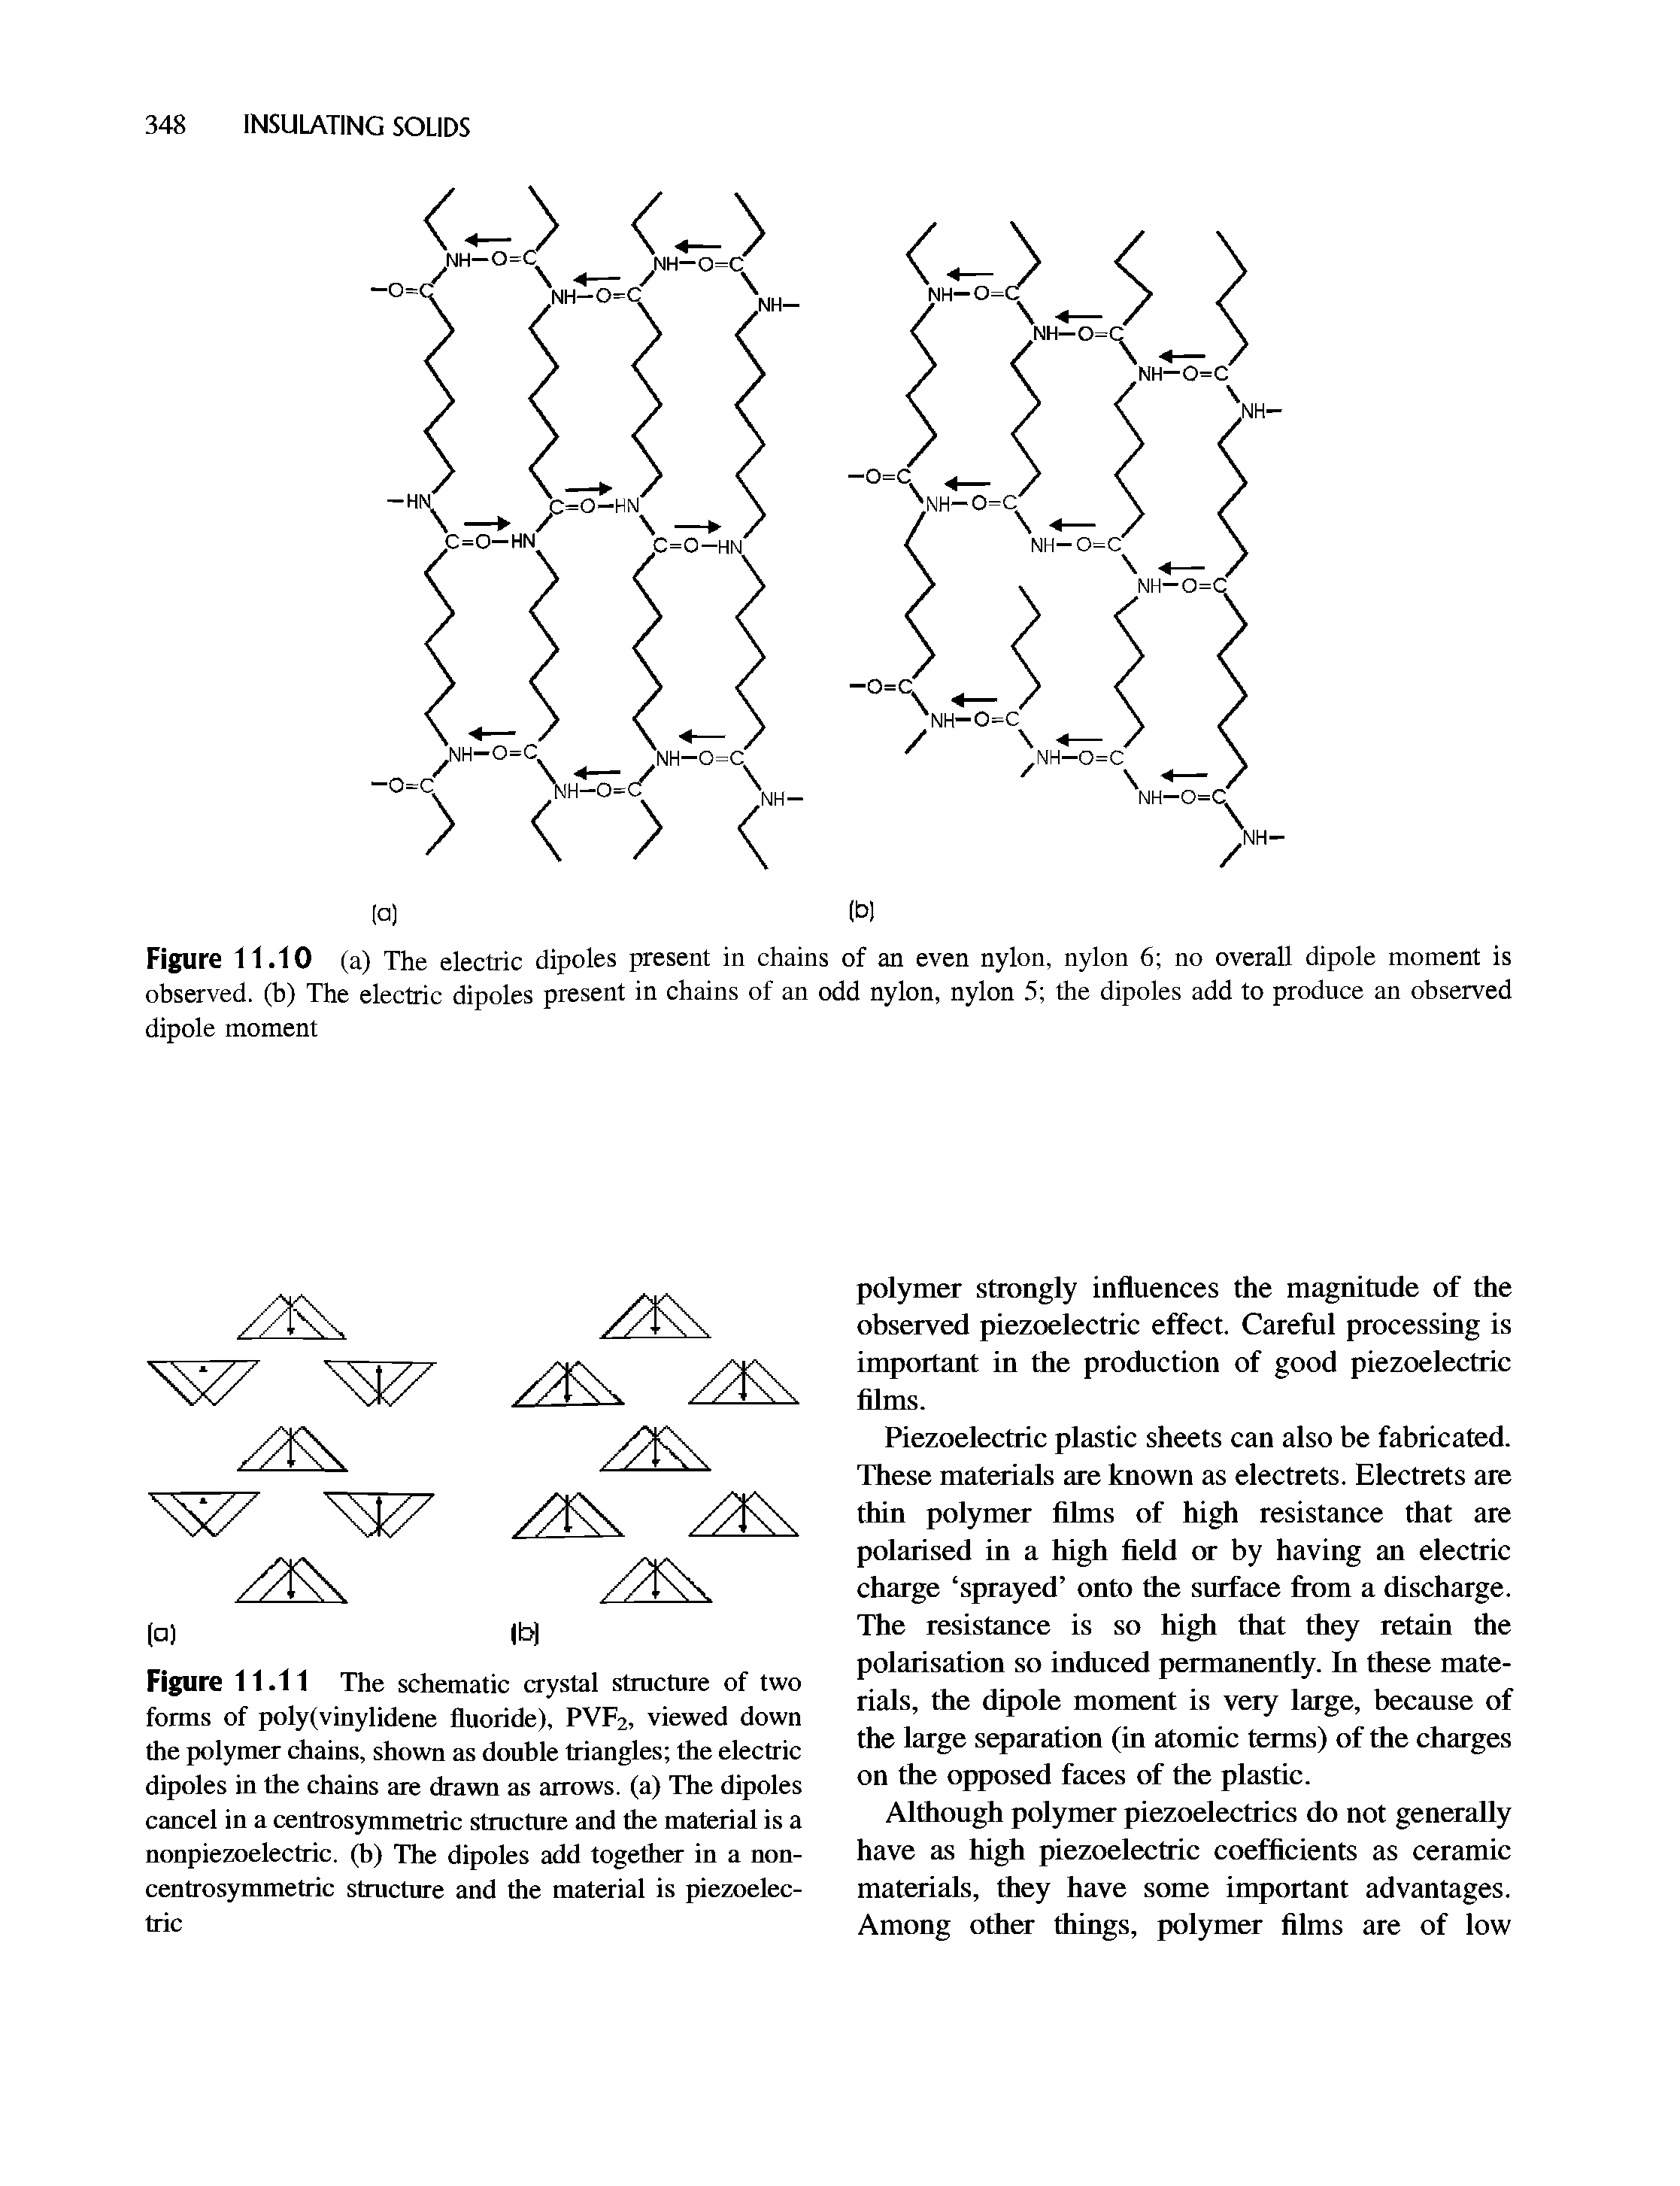 Figure 11.11 The schematic crystal structure of two forms of poly(vinylidene fluoride), PVF2, viewed down the polymer chains, shown as double triangles the electric dipoles in the chains are drawn as arrows, (a) The dipoles cancel in a centrosymmetric stmcture and the material is a nonpiezoelectric, (h) The dipoles add together in a non-centrosymmetric structure and the material is piezoelectric...